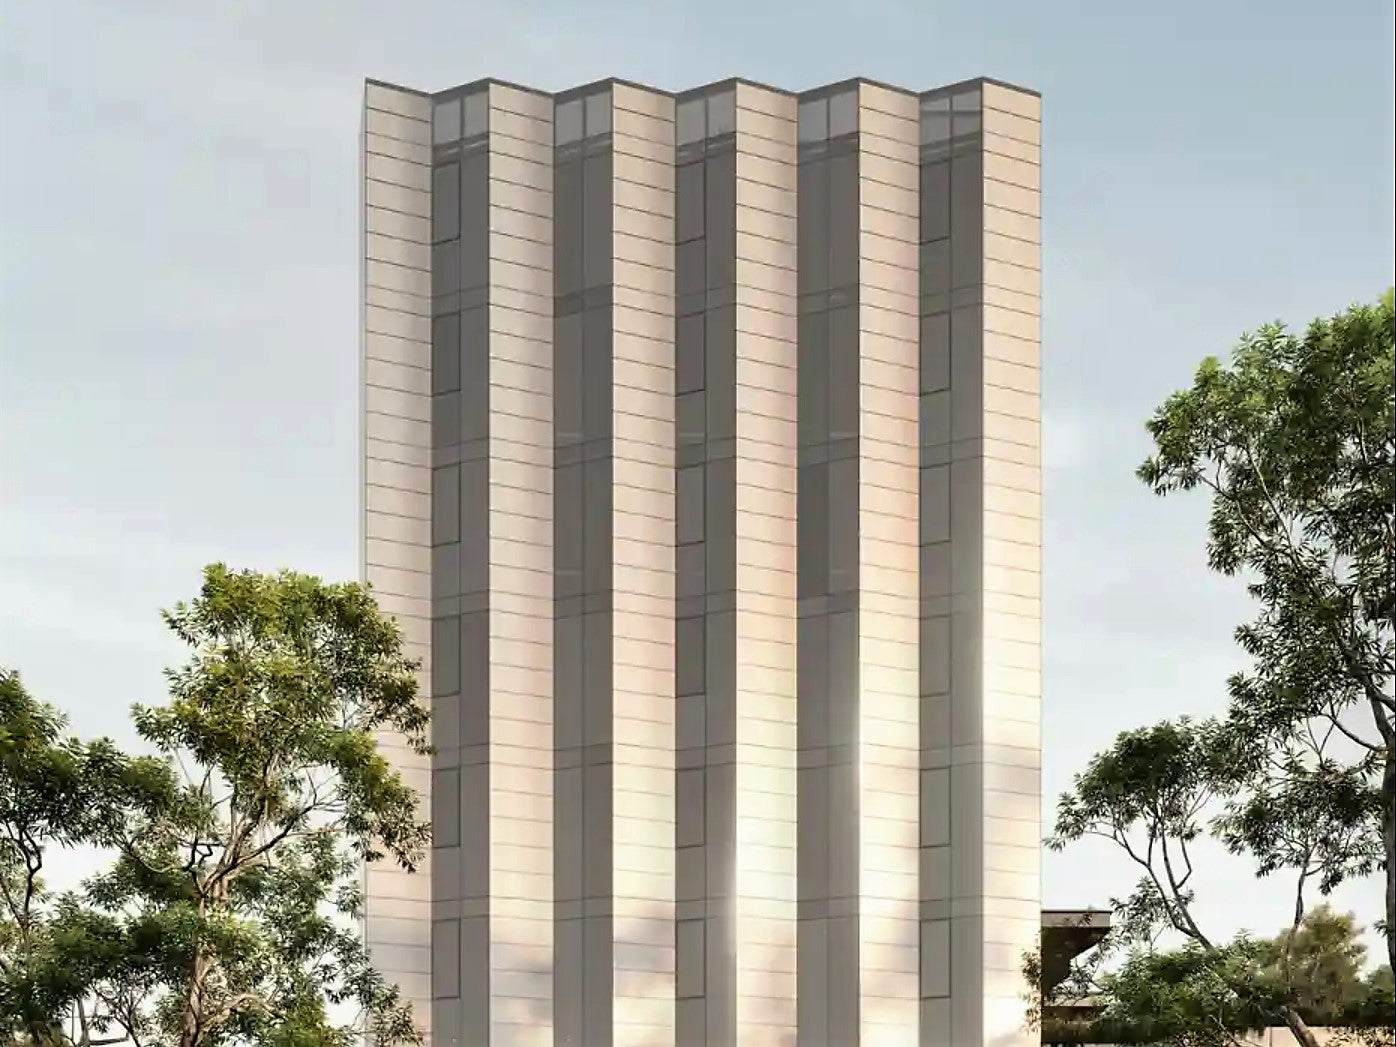 An eight-story office tower fully clad in solar panels will be built in Melbourne in 2023